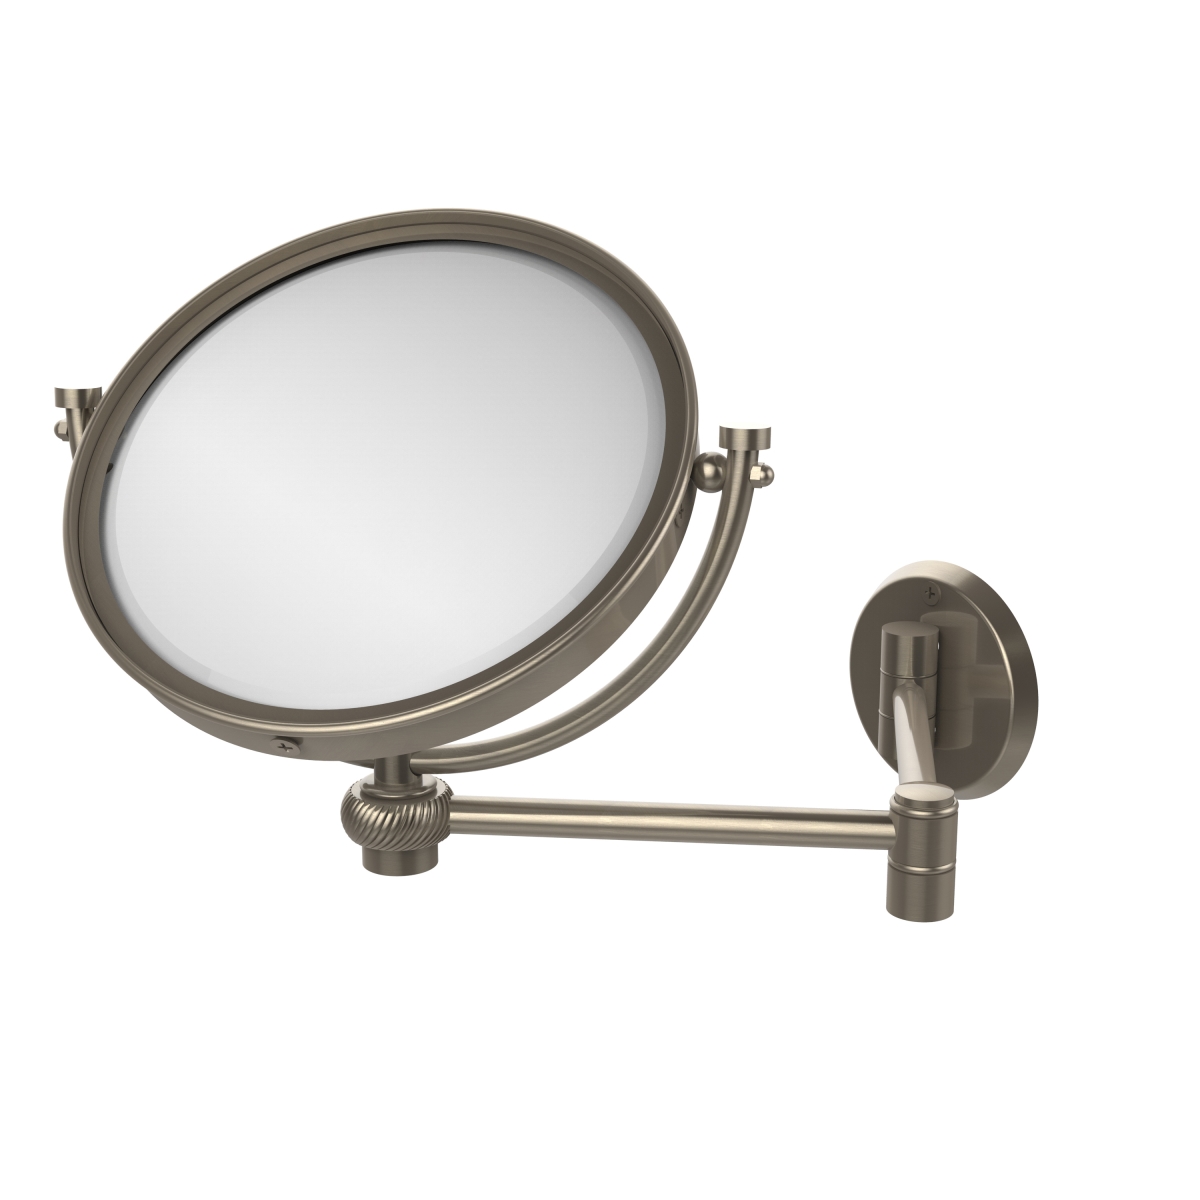 WM-6T-2X-PEW 8 in. Wall Mounted Extending Make-Up Mirror 2X Magnification with Twist Accent, Antique Pewter -  Allied Brass, WM-6T/2X-PEW